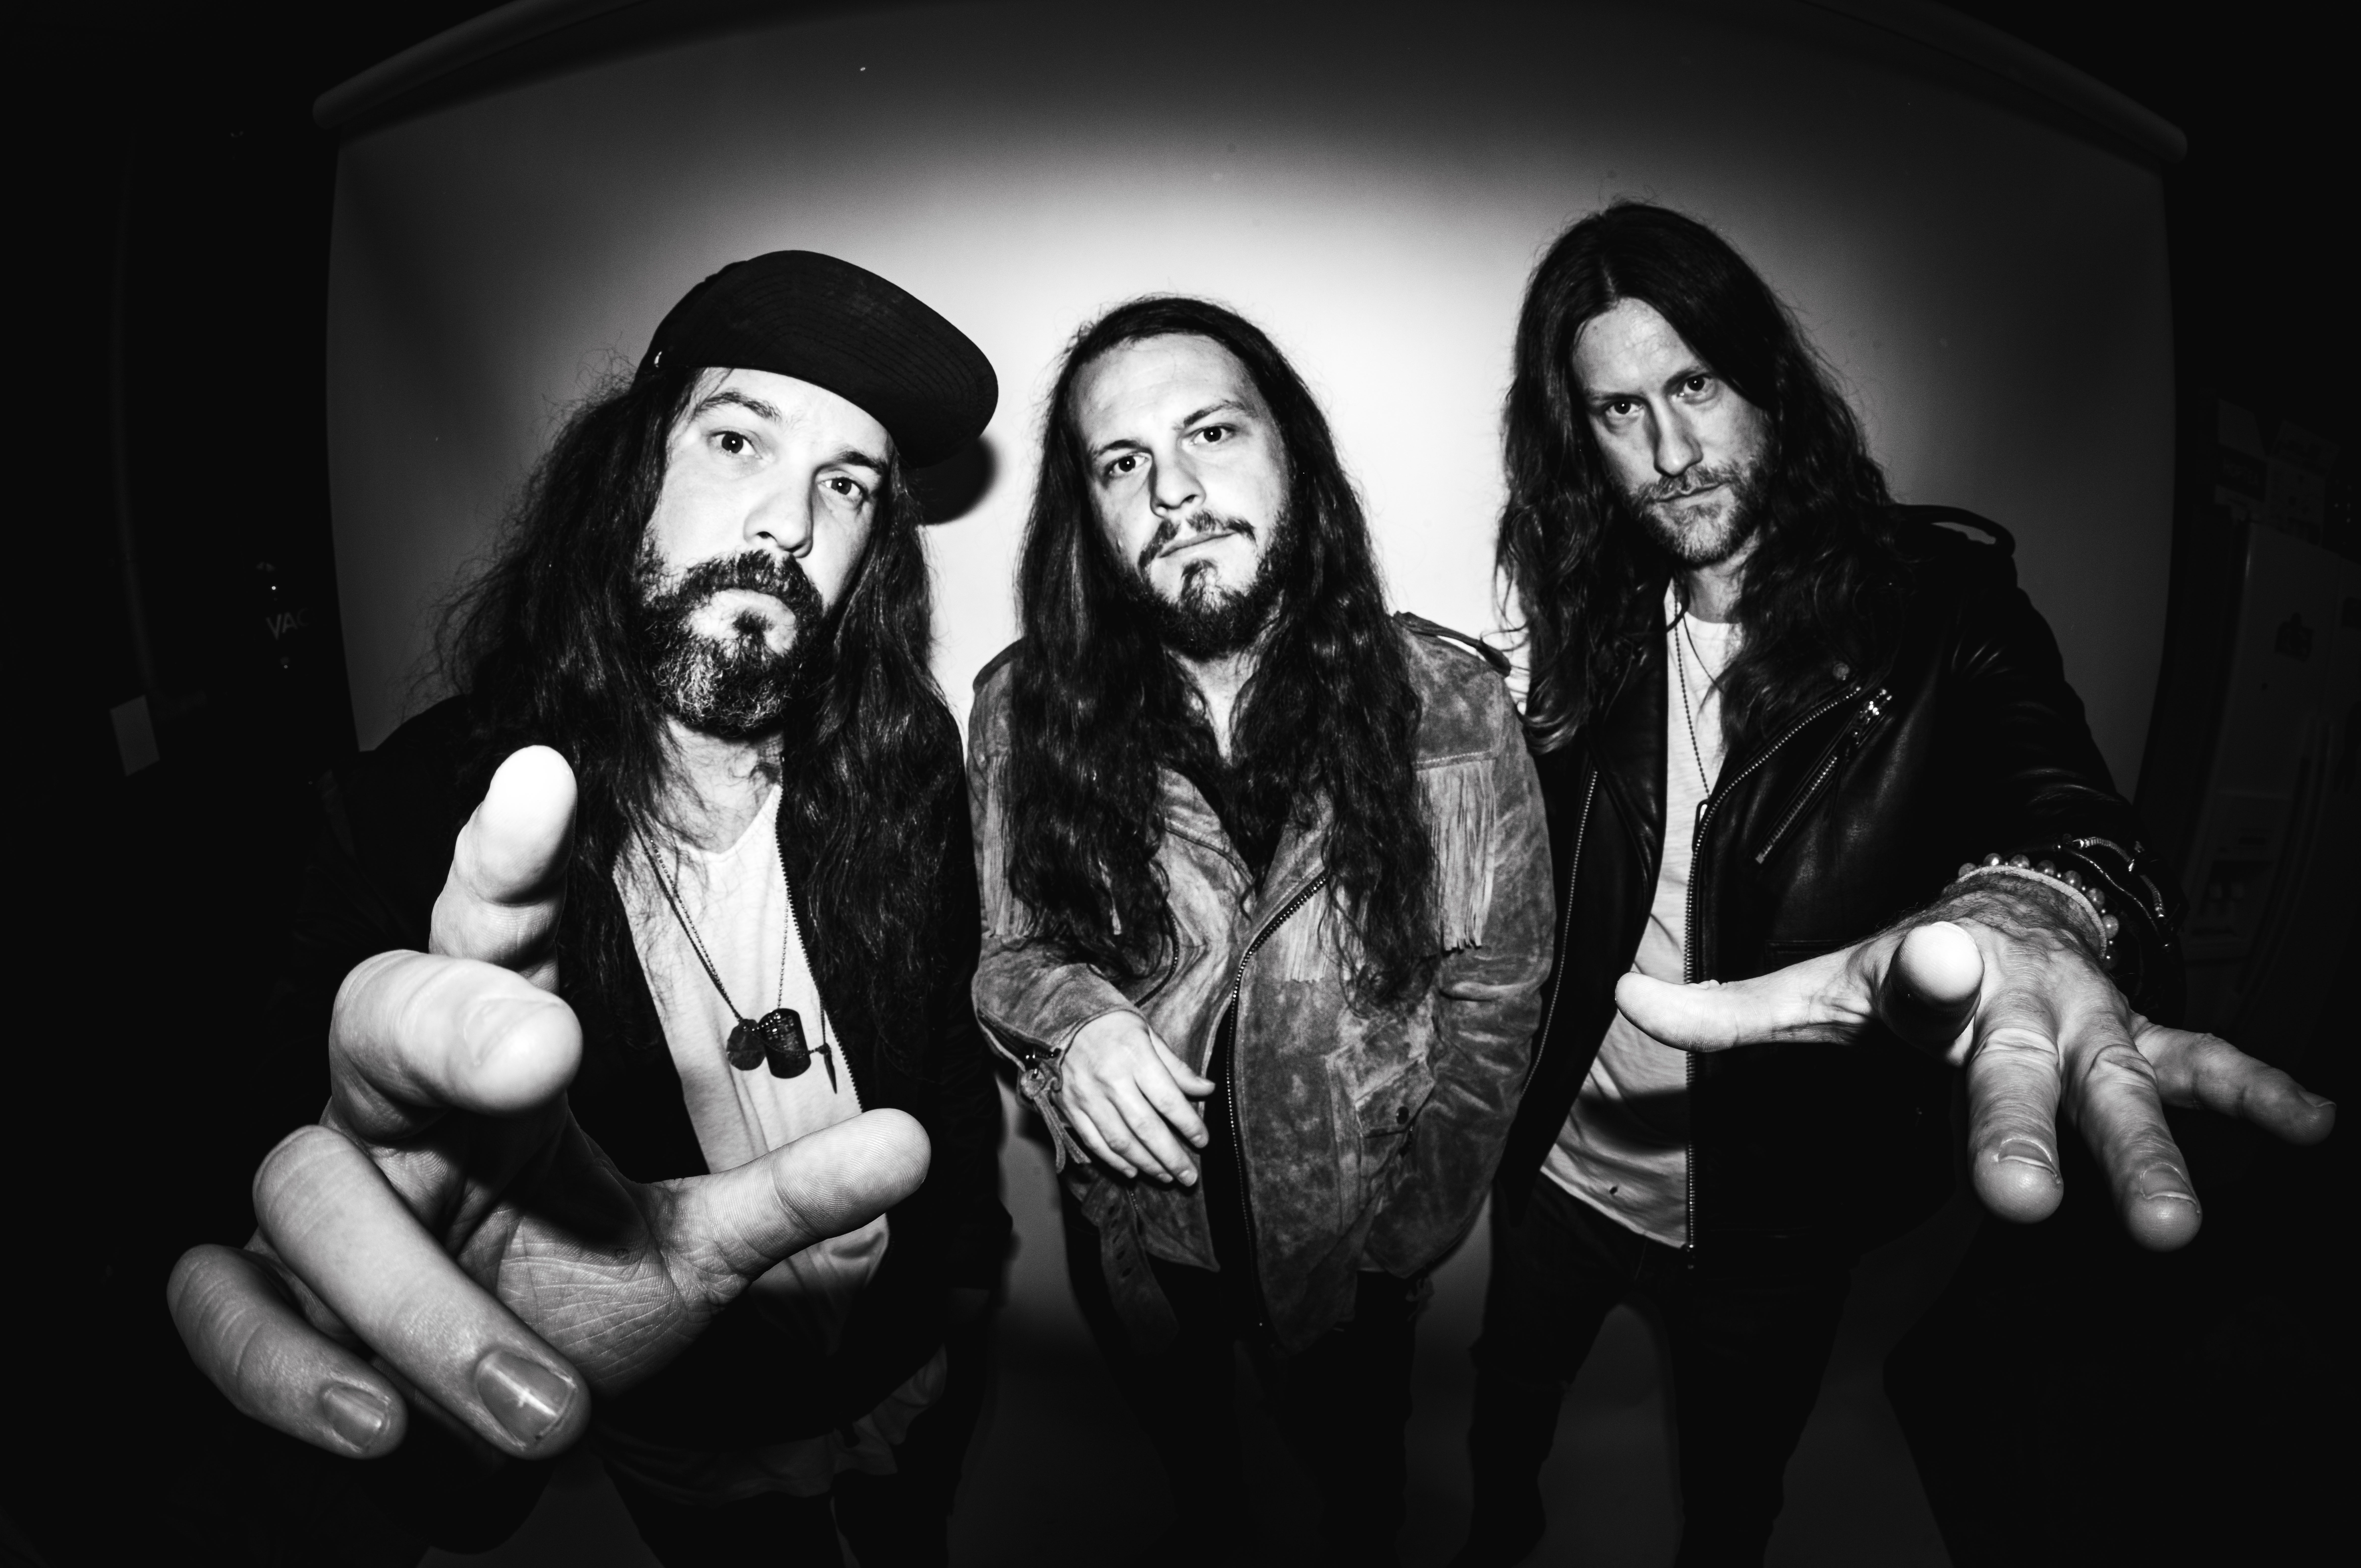 Black-and-white image of three men with long hair, beards, and serious expressions, standing and facing the camera with hands extended towards the lens—could this be a preview of their new music?